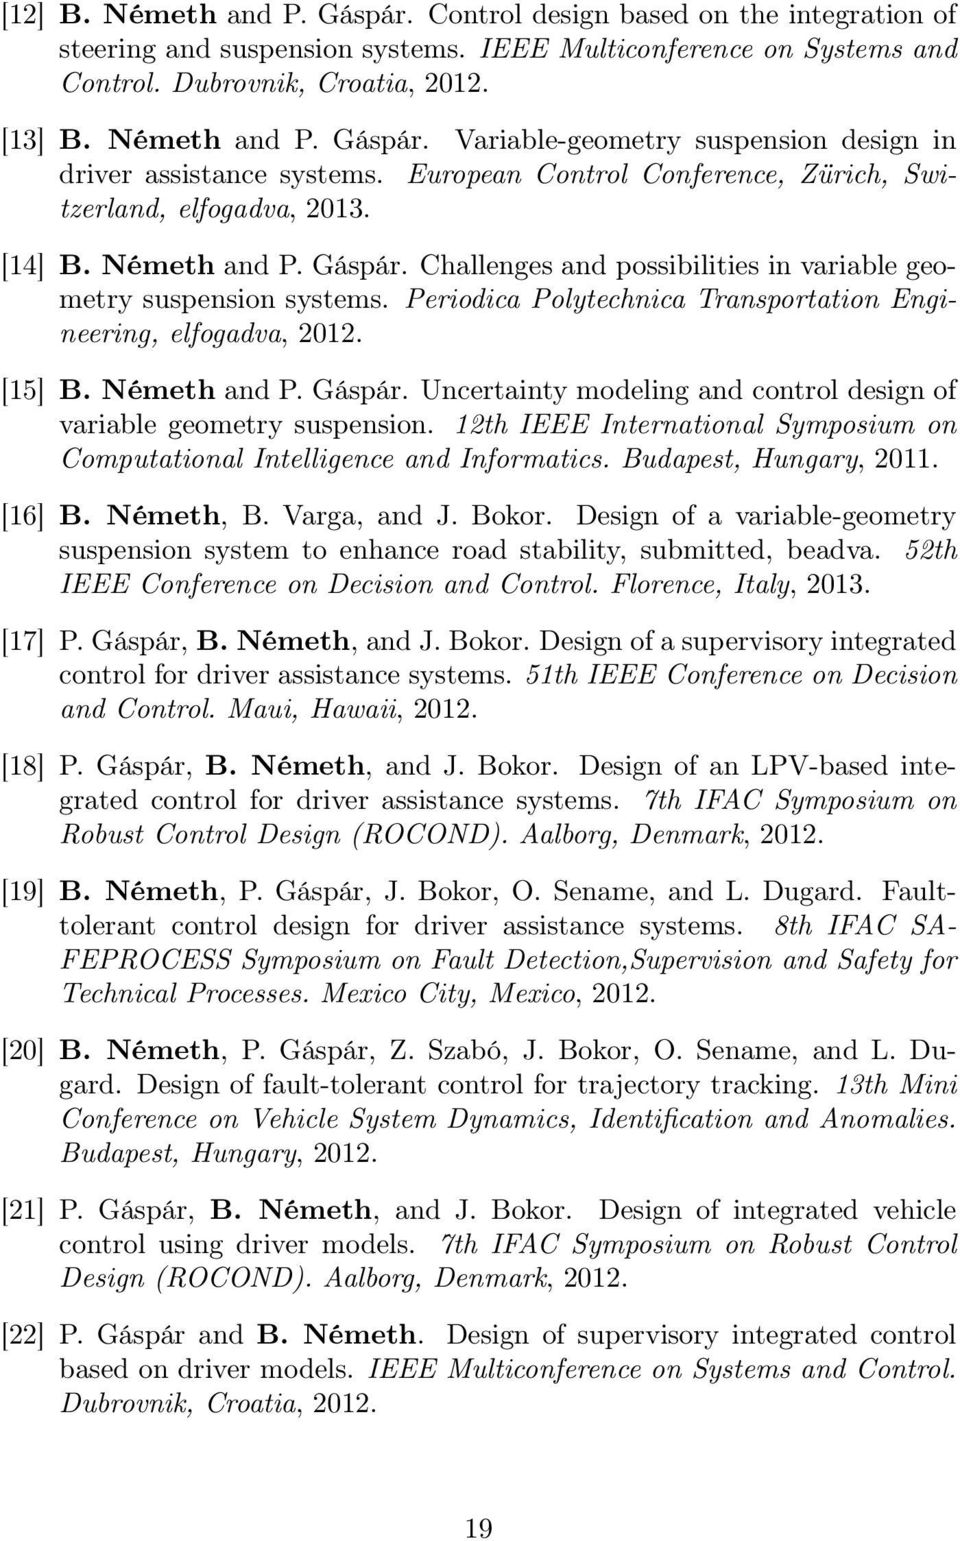 Periodica Polytechnica Transportation Engineering, elfogadva, 2012. [15] B. Németh and P. Gáspár. Uncertainty modeling and control design of variable geometry suspension.